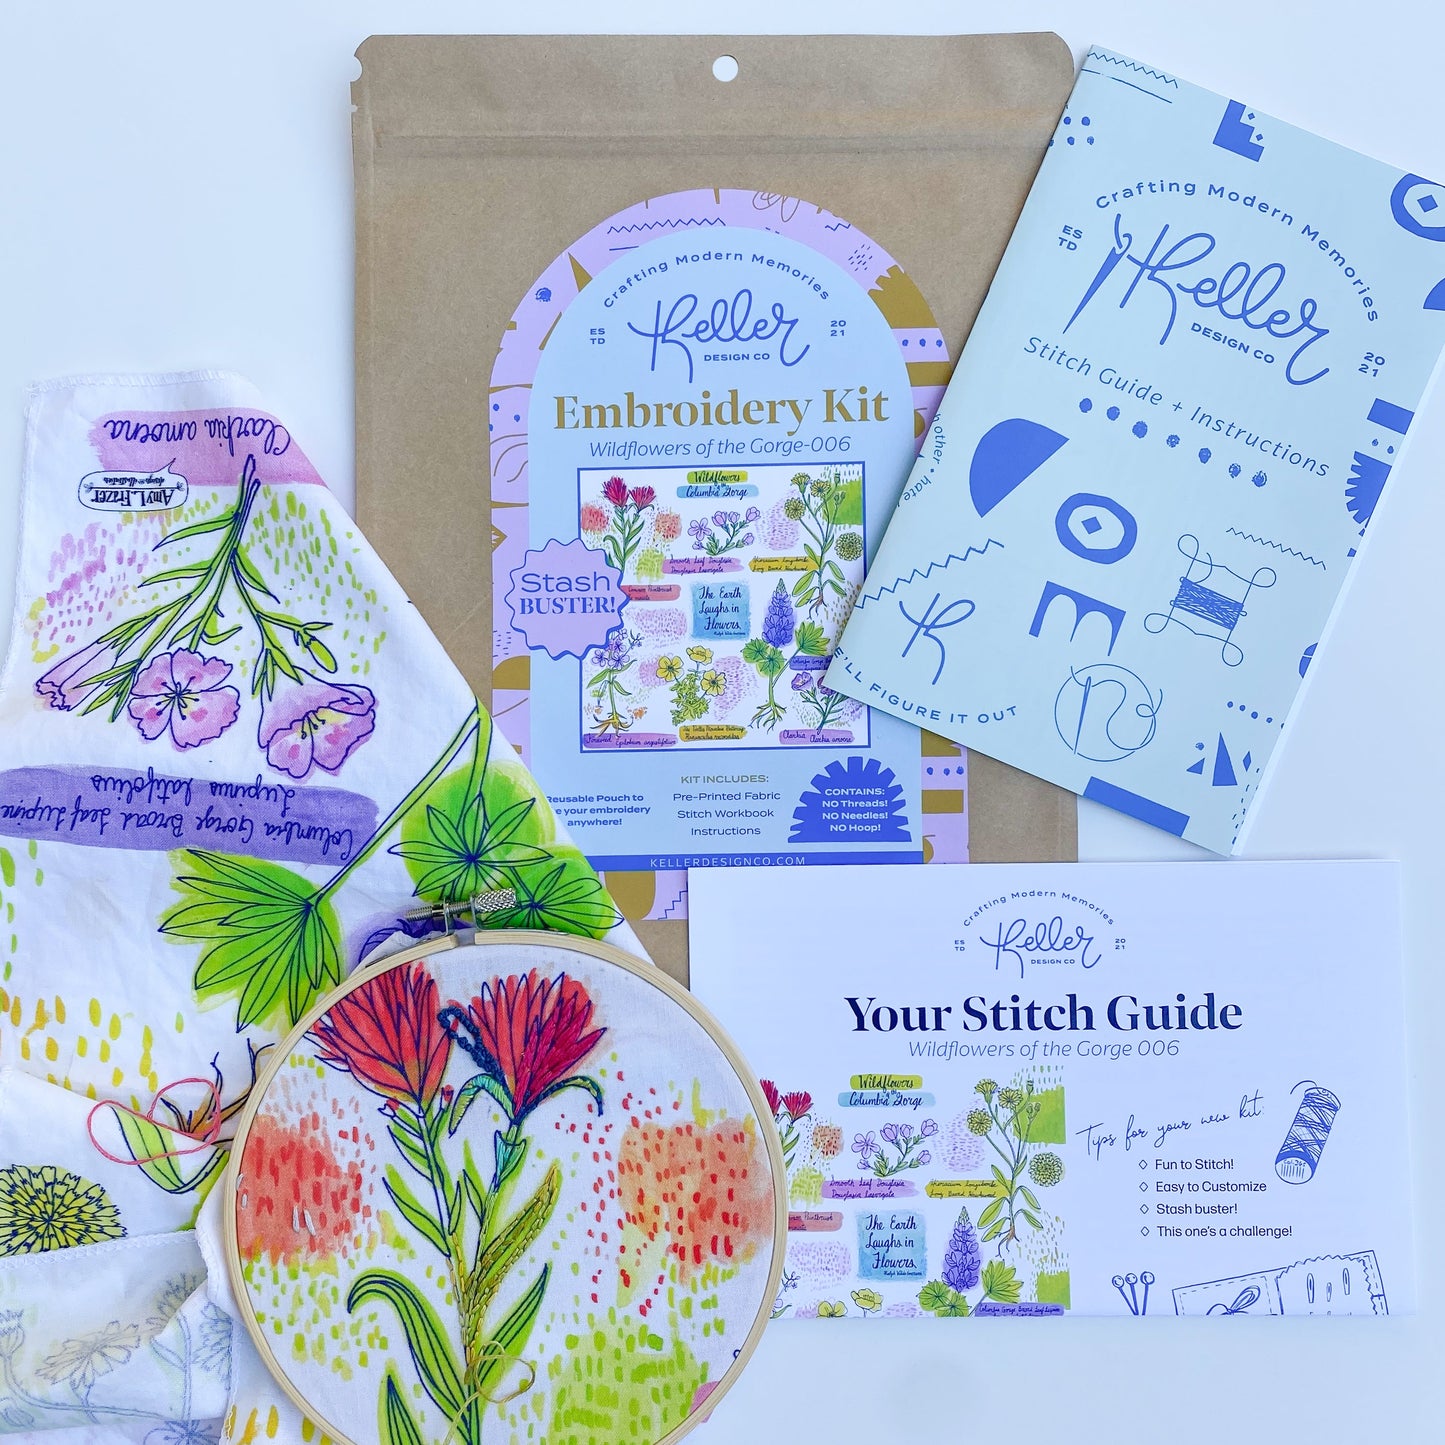 Stash Buster! Wildflowers Embroidery Kit-Wholesale